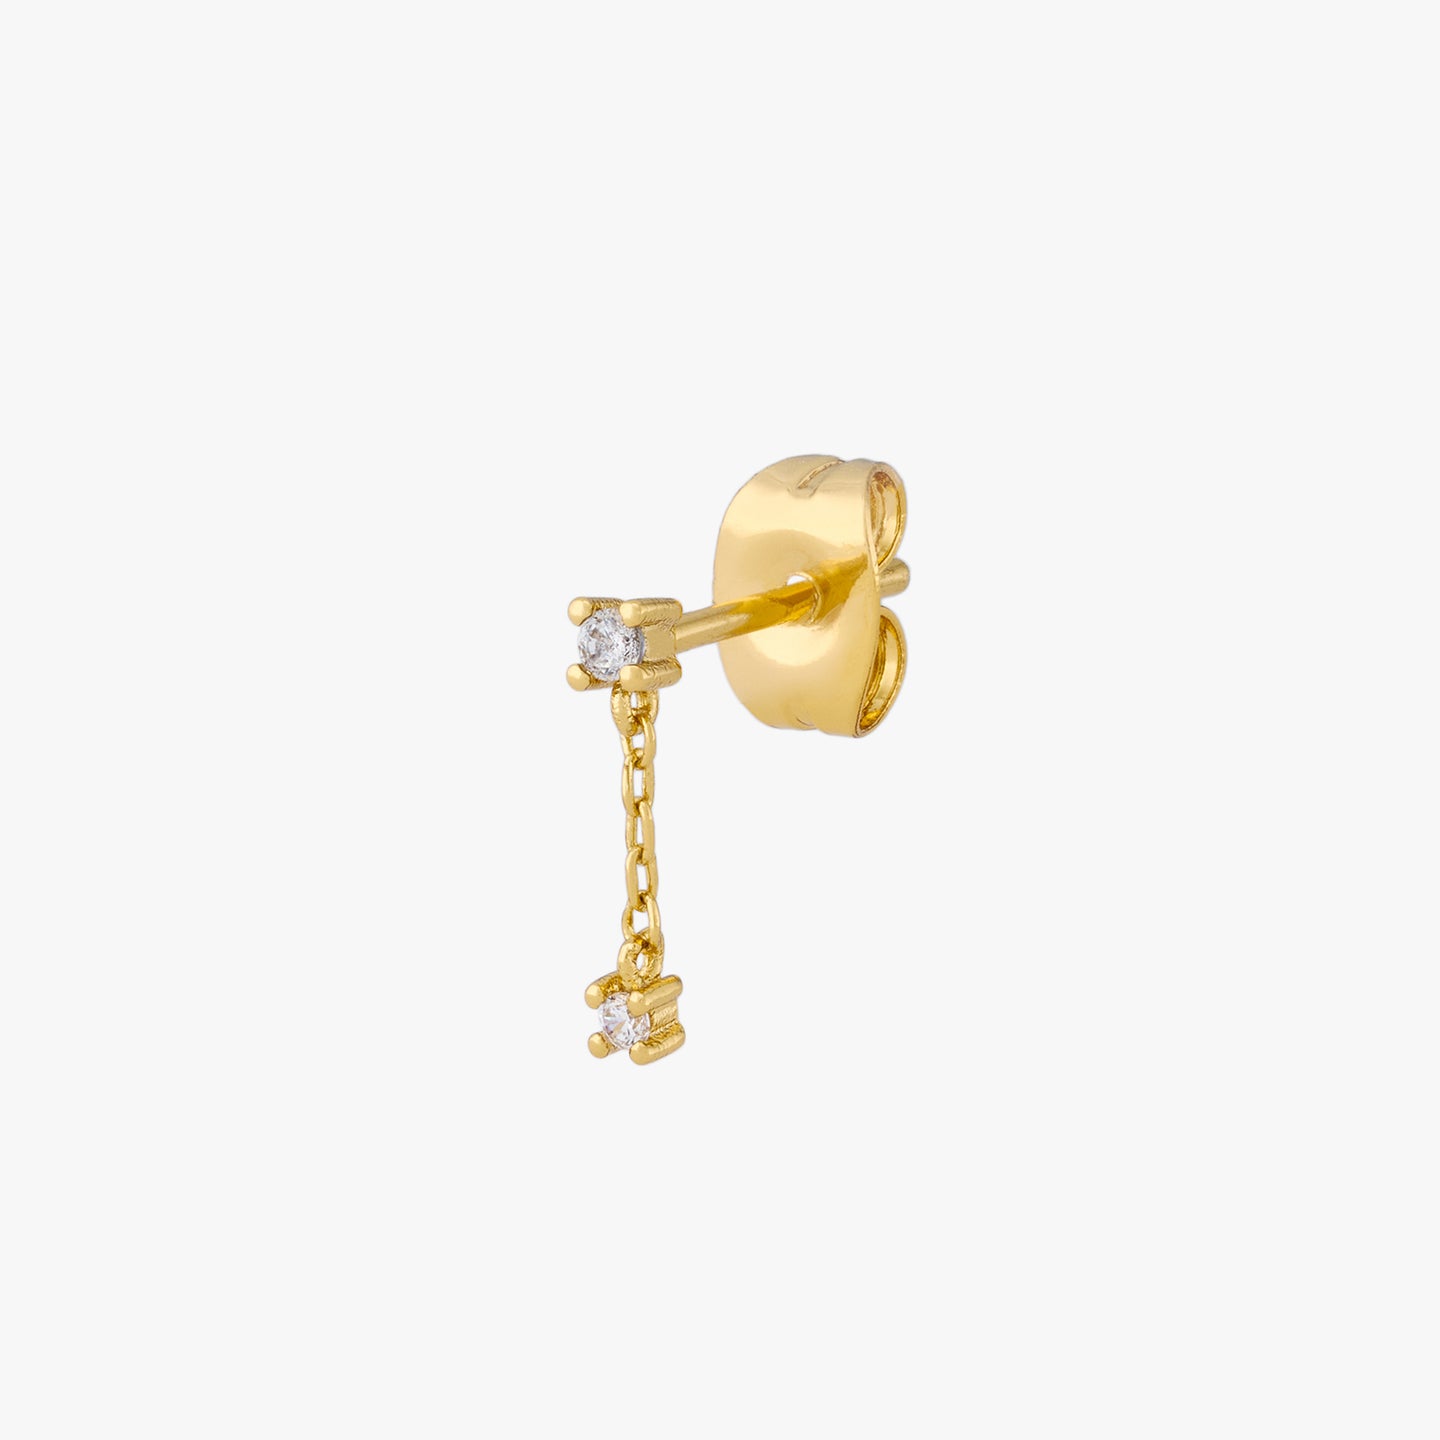 This is a small cz stud with a dangling cz connected by a gold chain color:null|gold/clear